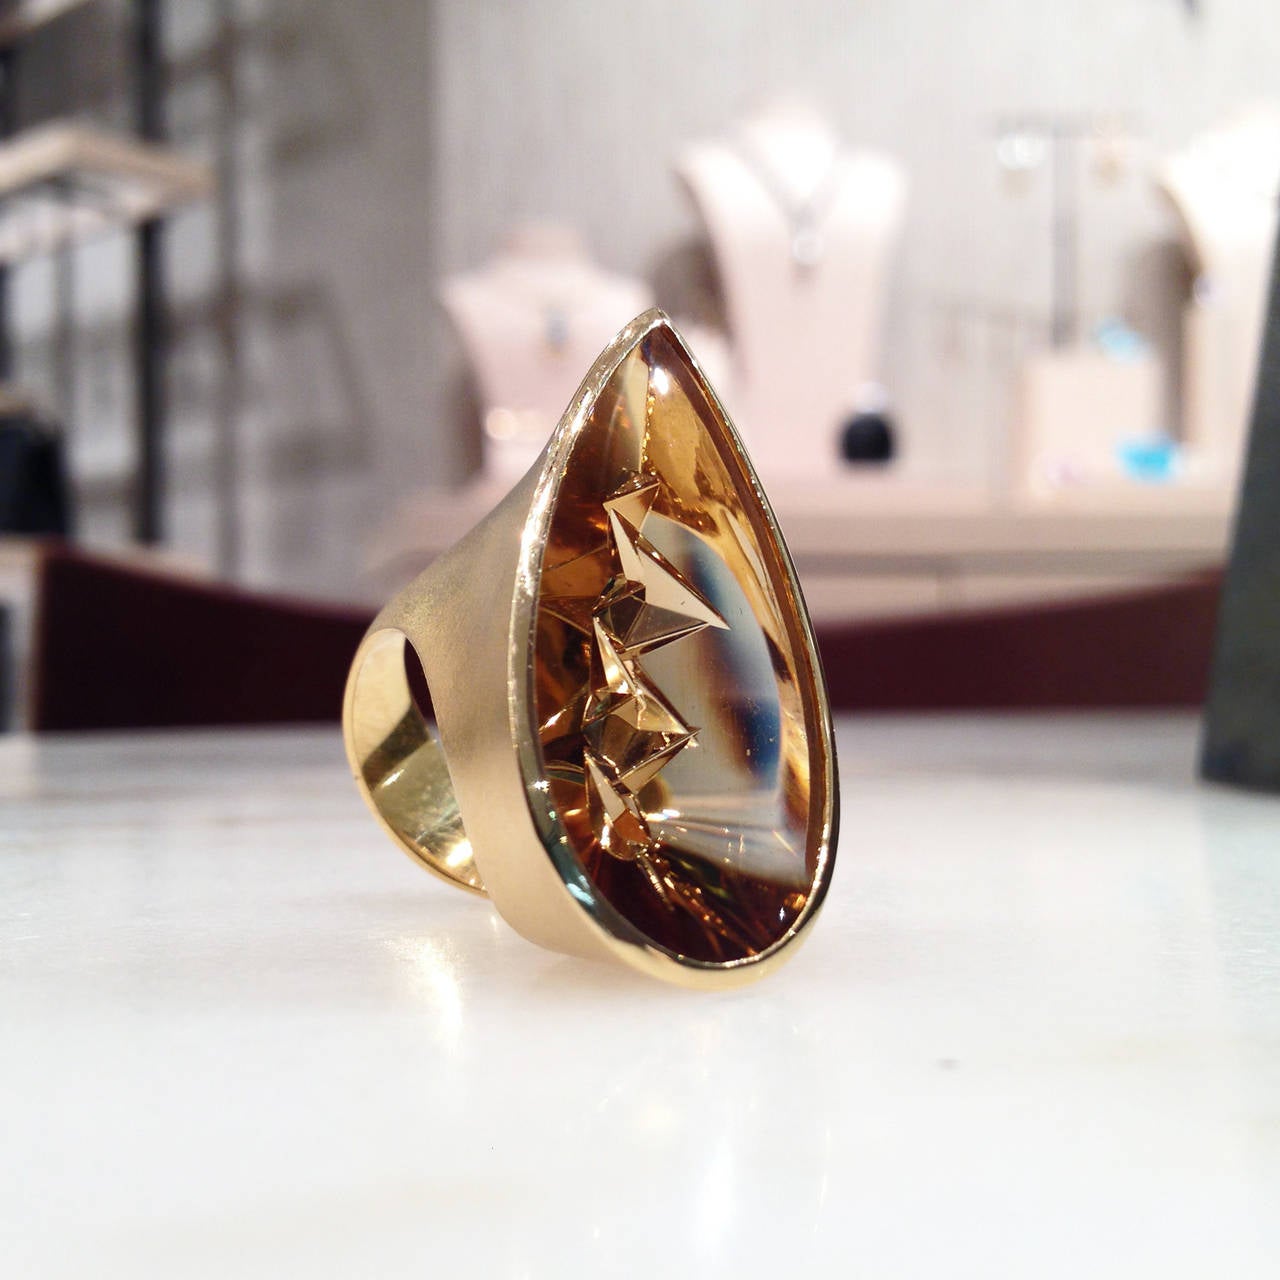 One-of-a-Kind Imperial Citrine Ring handcrafted in matte, satin-finished 18k yellow gold with a Munsteiner icicle-cut citrine weighing a total of 20.75 carats. Size US 6.75 (Can be sized).